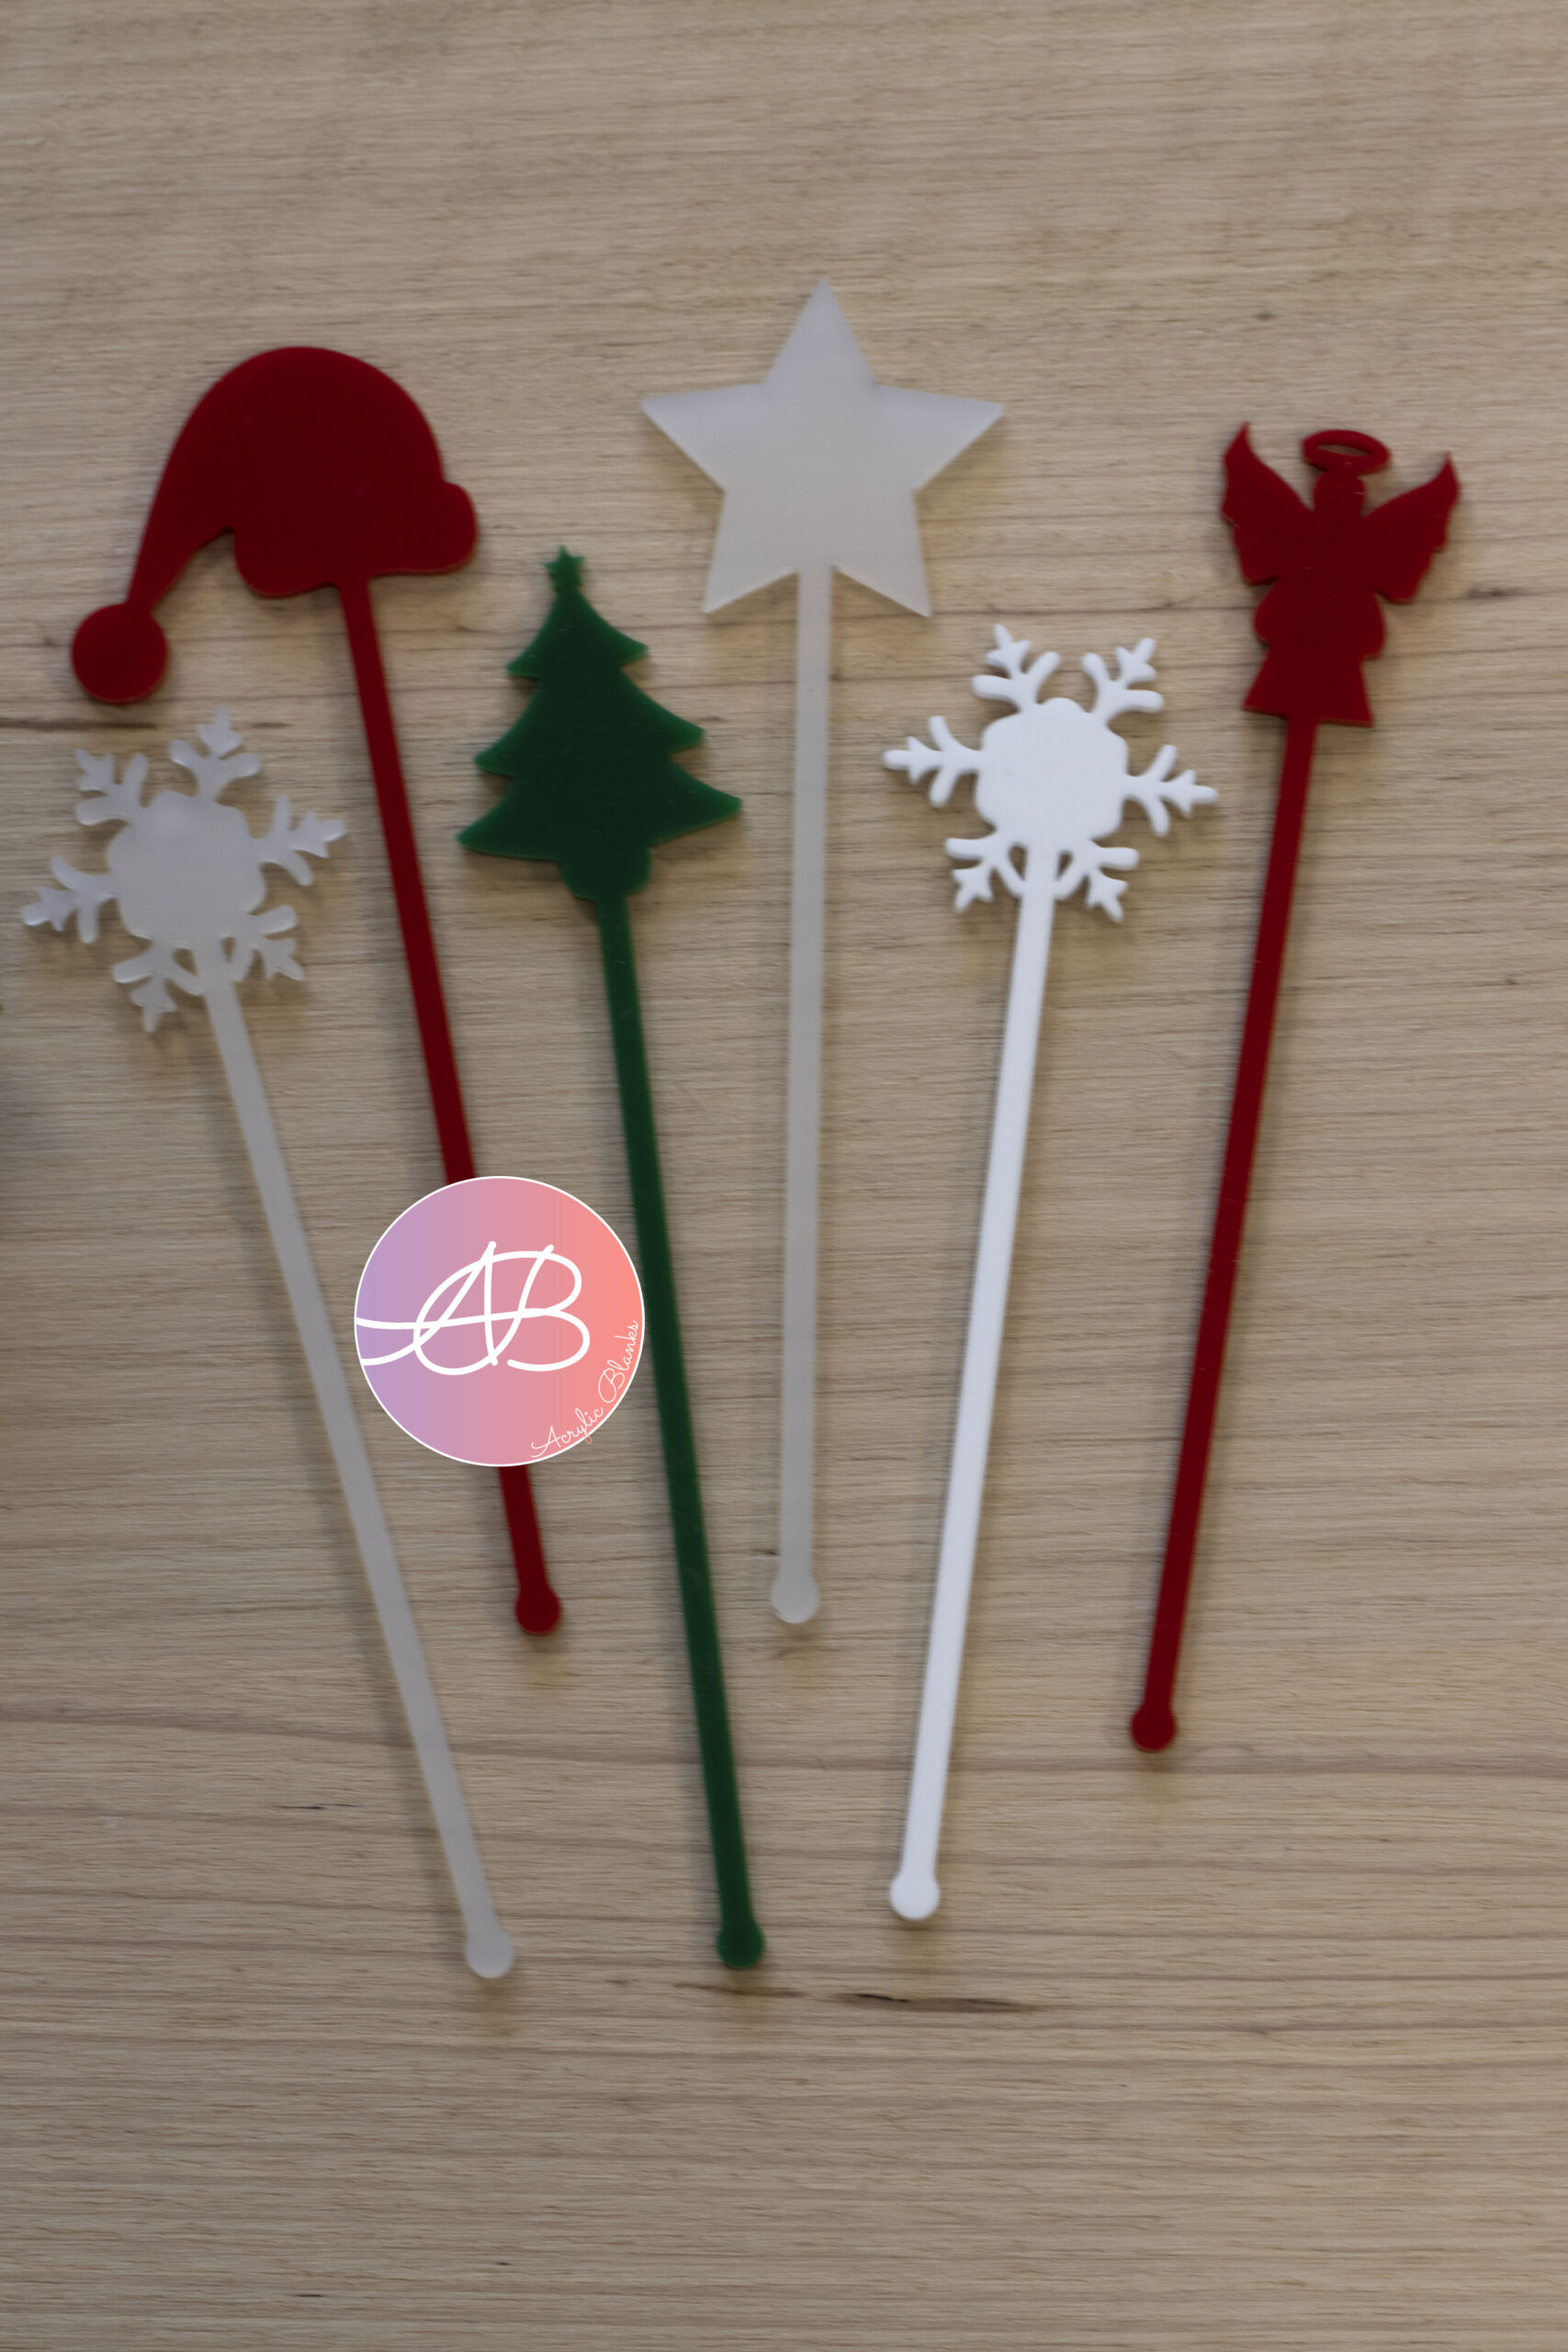 https://acrylicblanks.com.au/wp-content/uploads/2021/11/christmas-drink-stirrers-all-scaled.jpg